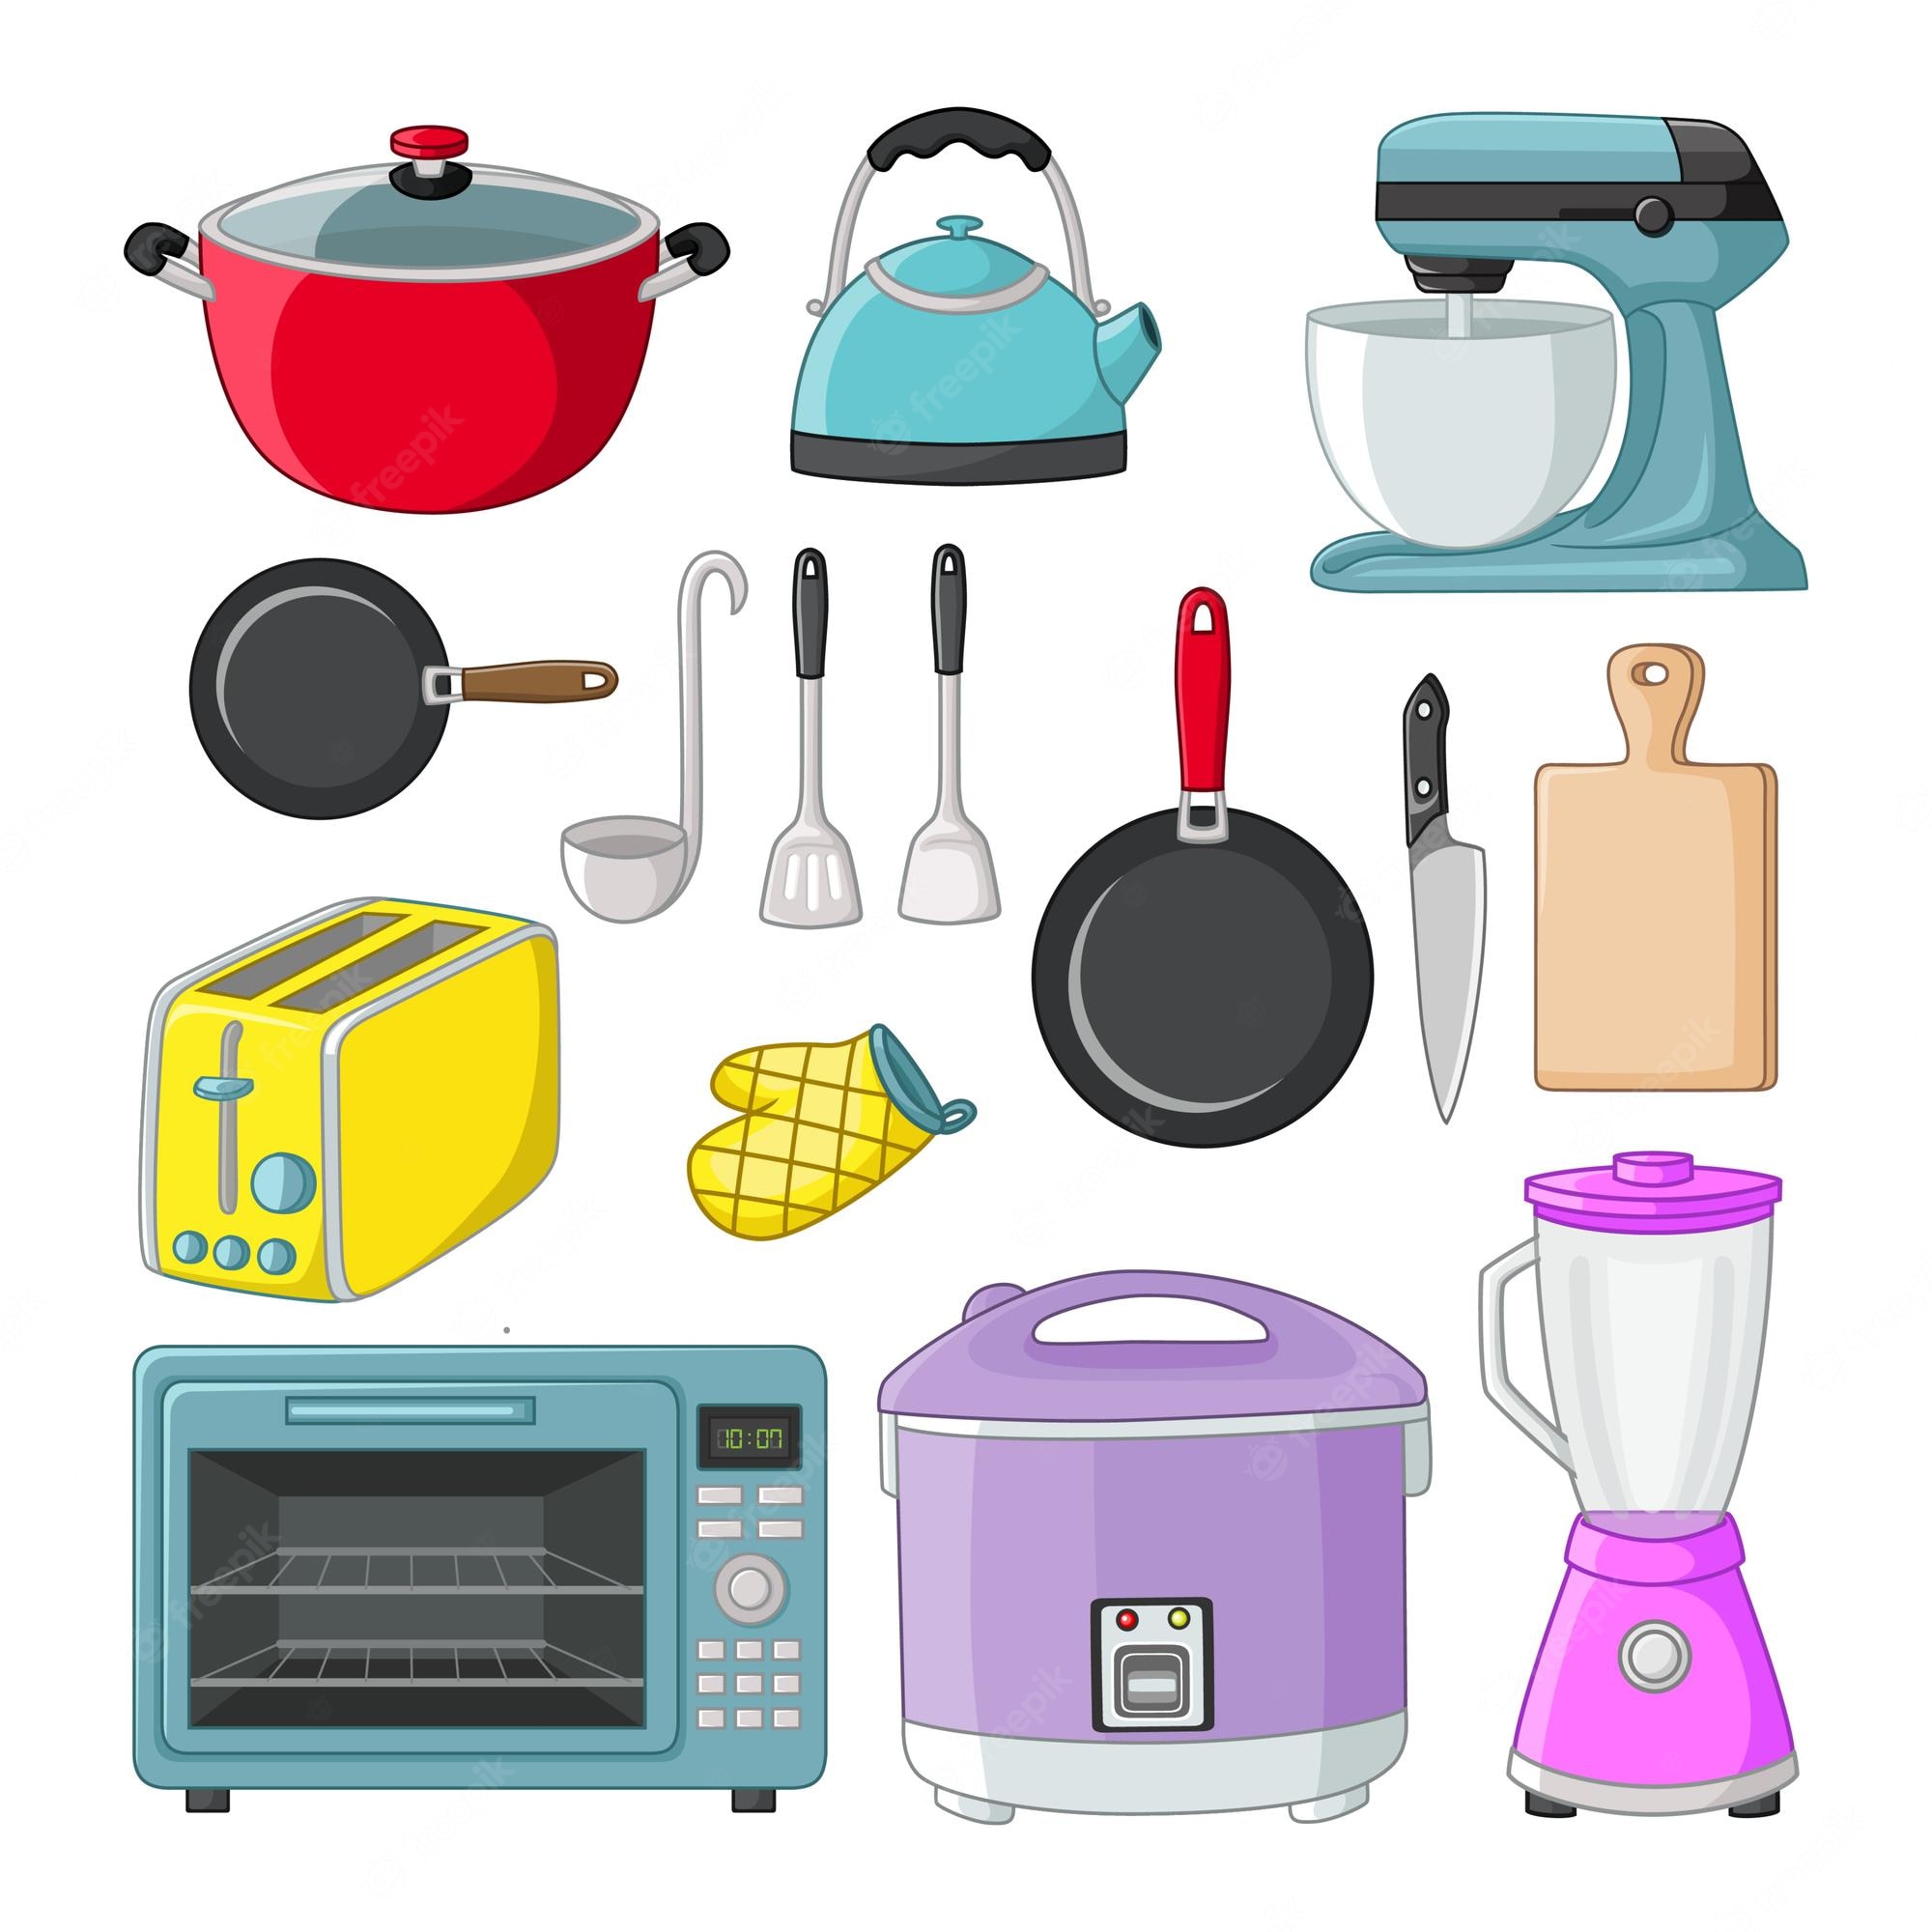 Free Clipart Household Appliances Free Images At Clker Com Clip Art